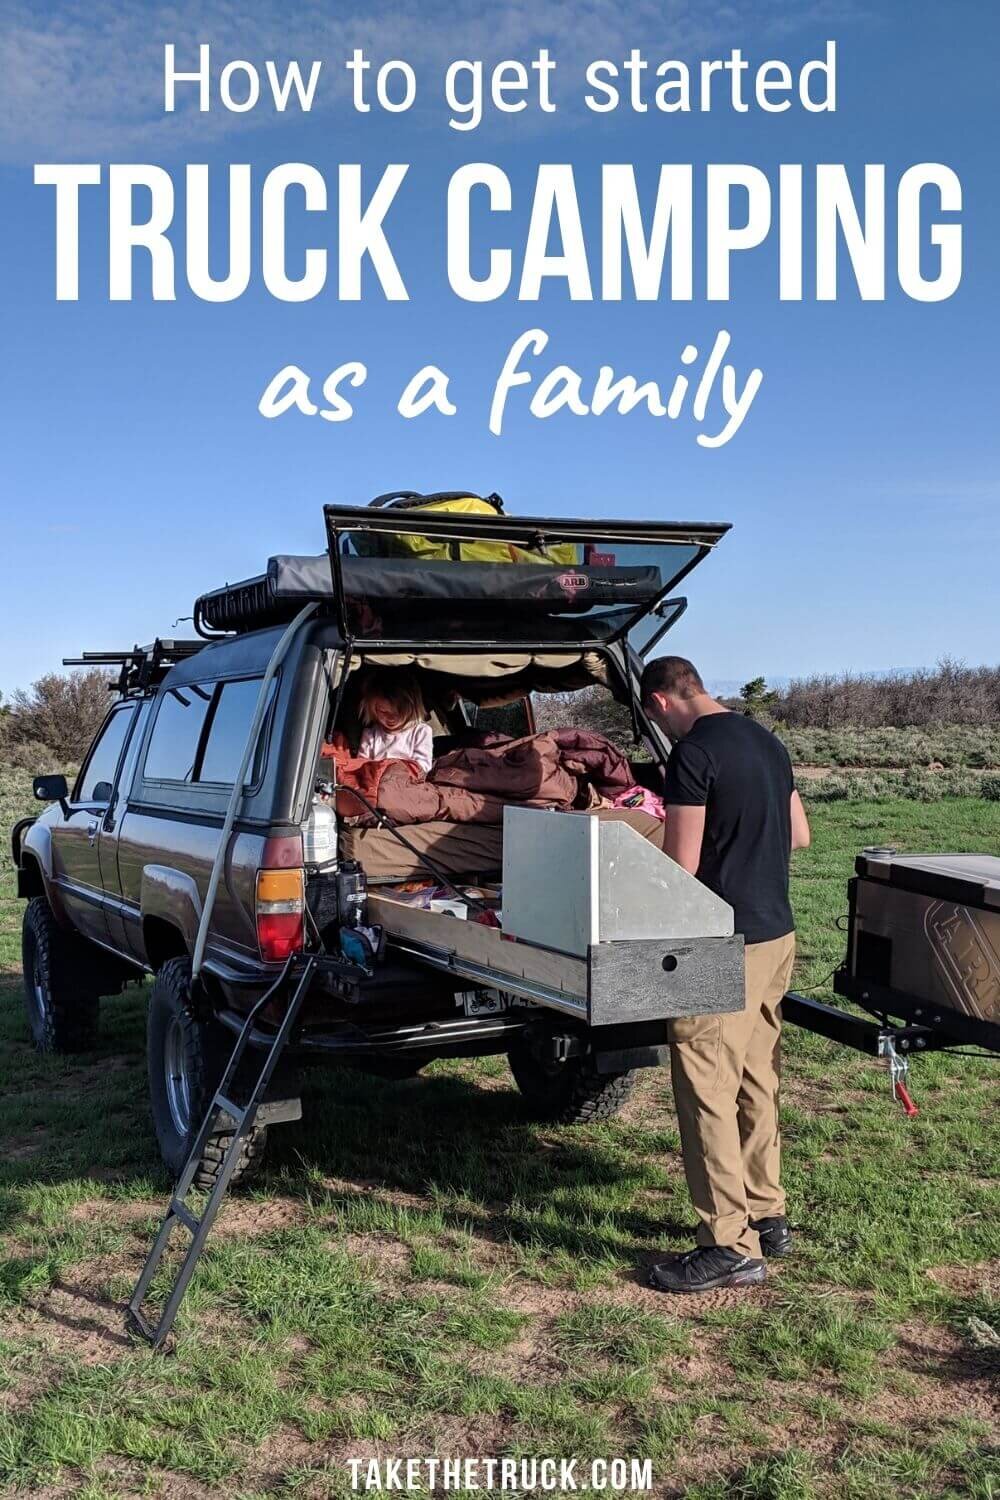 This post is full of all you need to get started truck bed camping or truck shell camping from your pickup - truck camping ideas, simple setup tips, advice on wild camping from your truck, plus more!